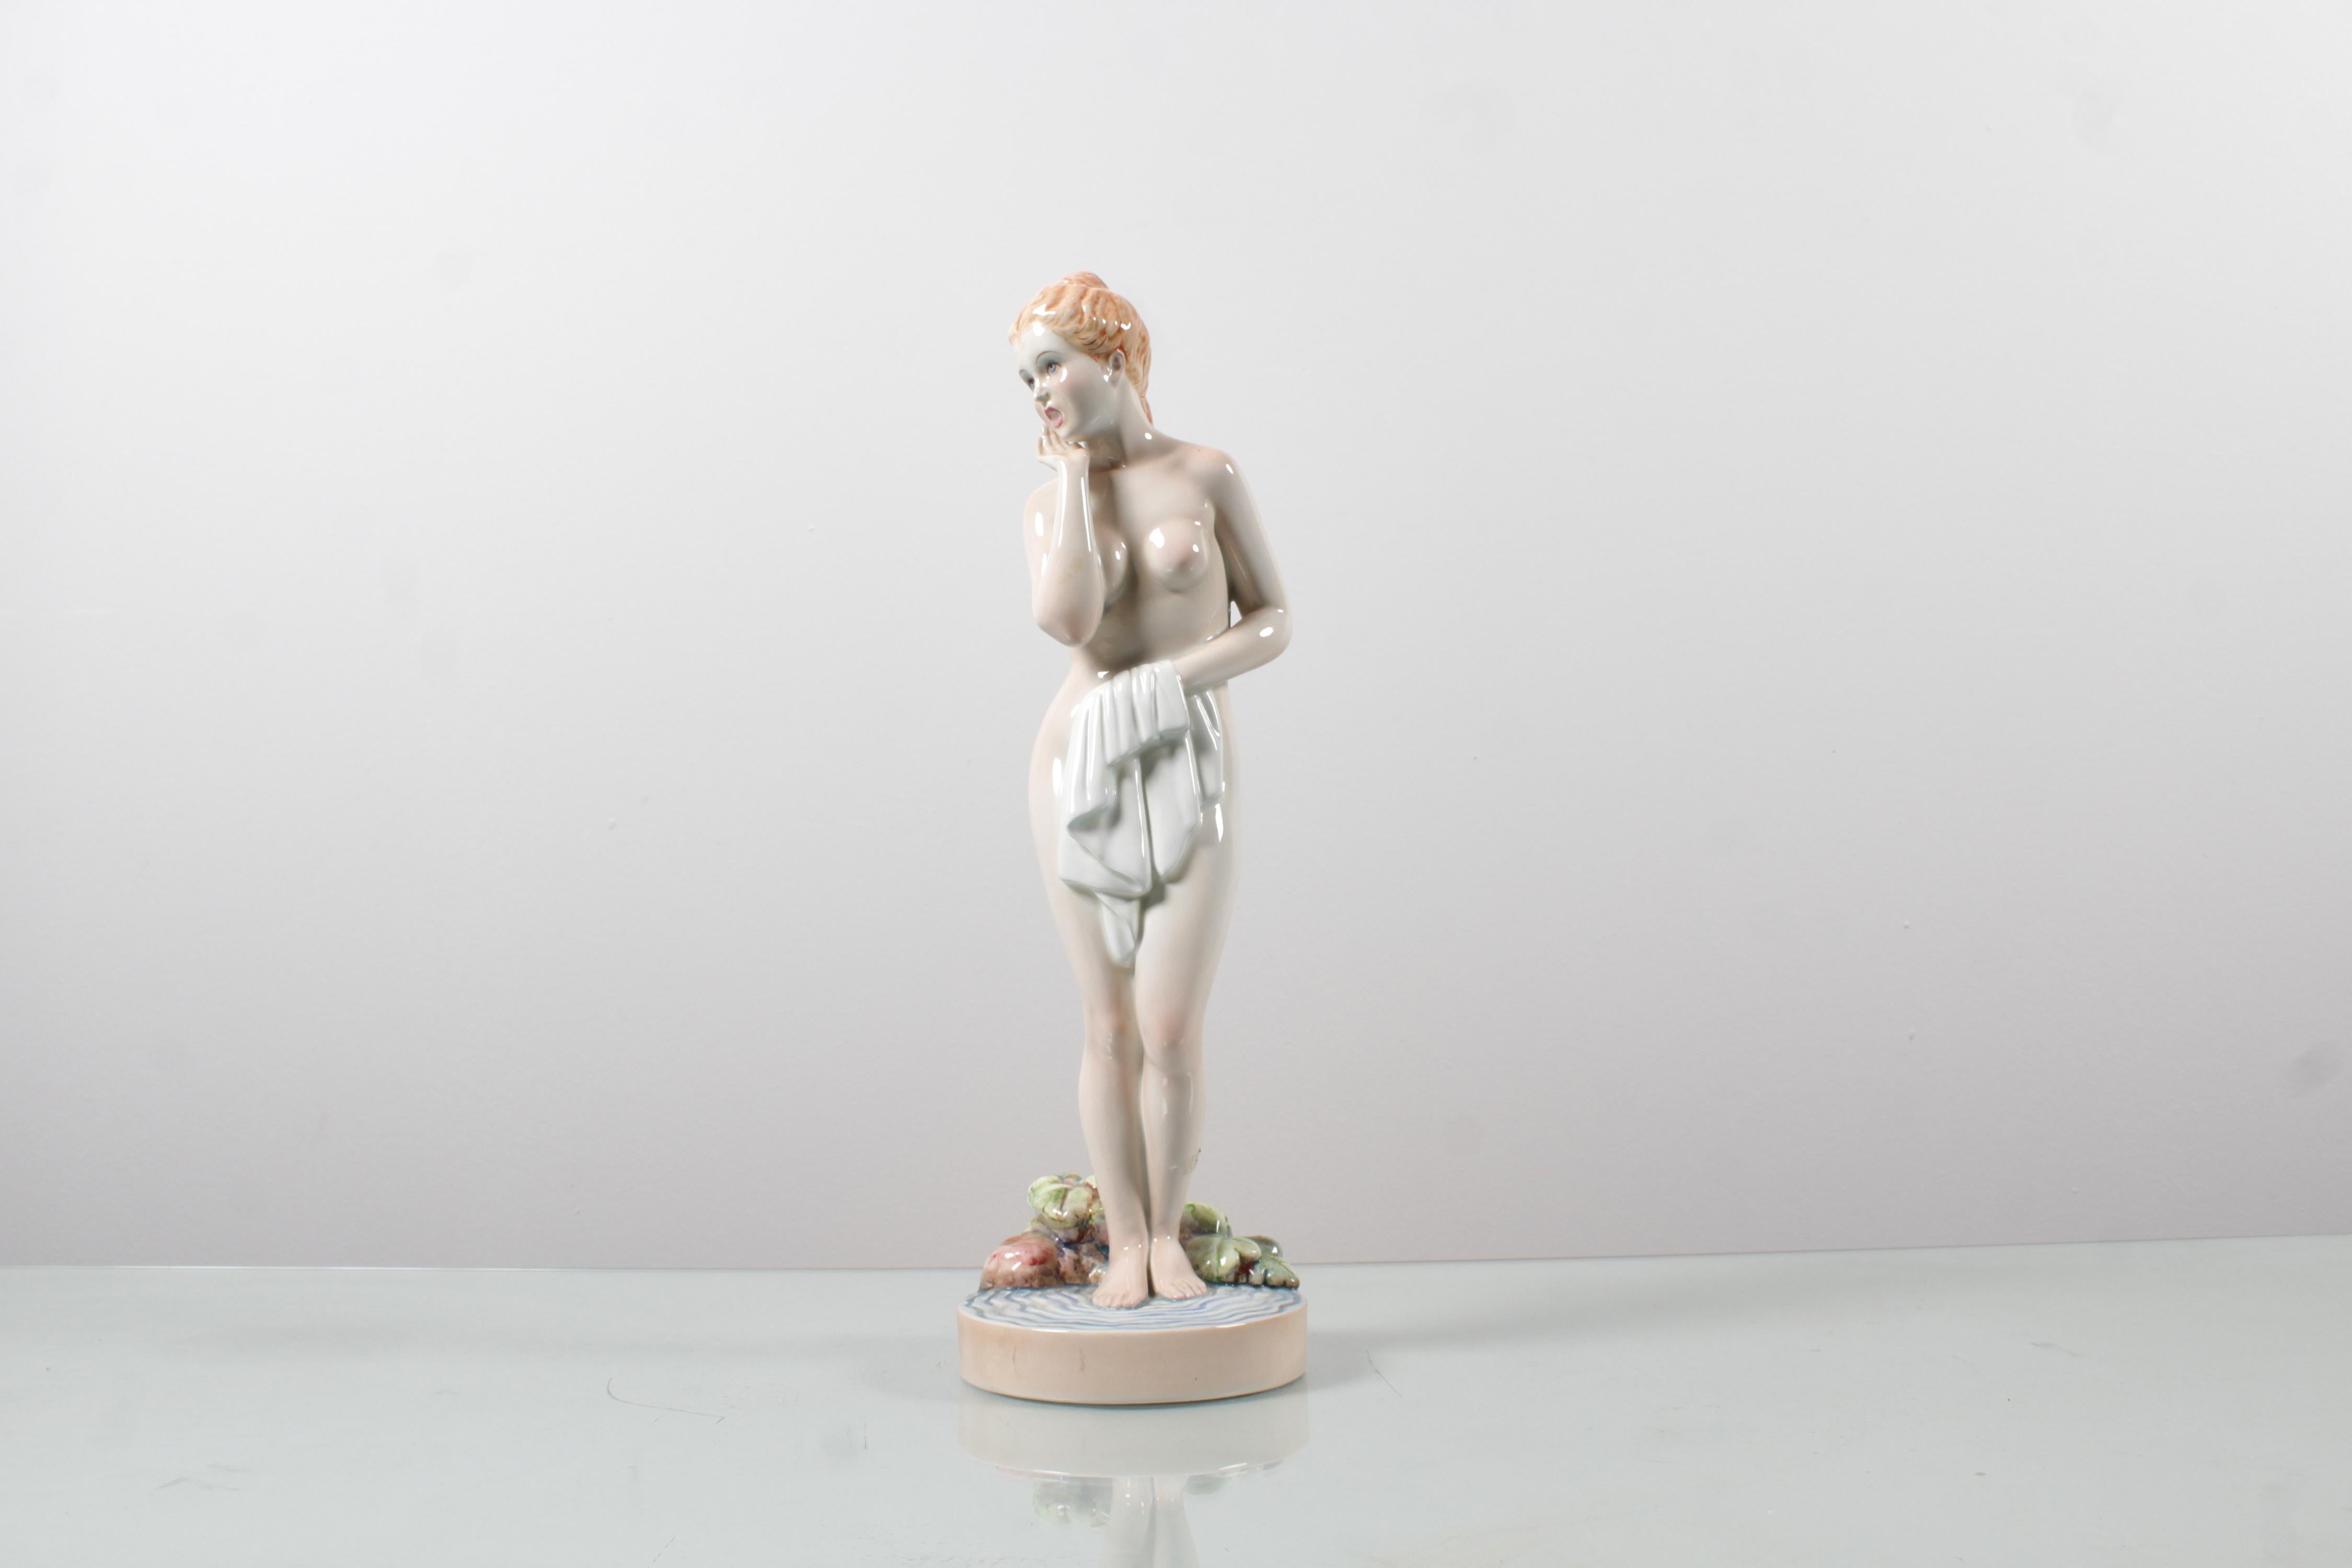 Delightful figure in very fine porcelain depicting a female nude, with intact colors and shine. Signed on the bottom by the master ceramist Giovanni Ronzan (